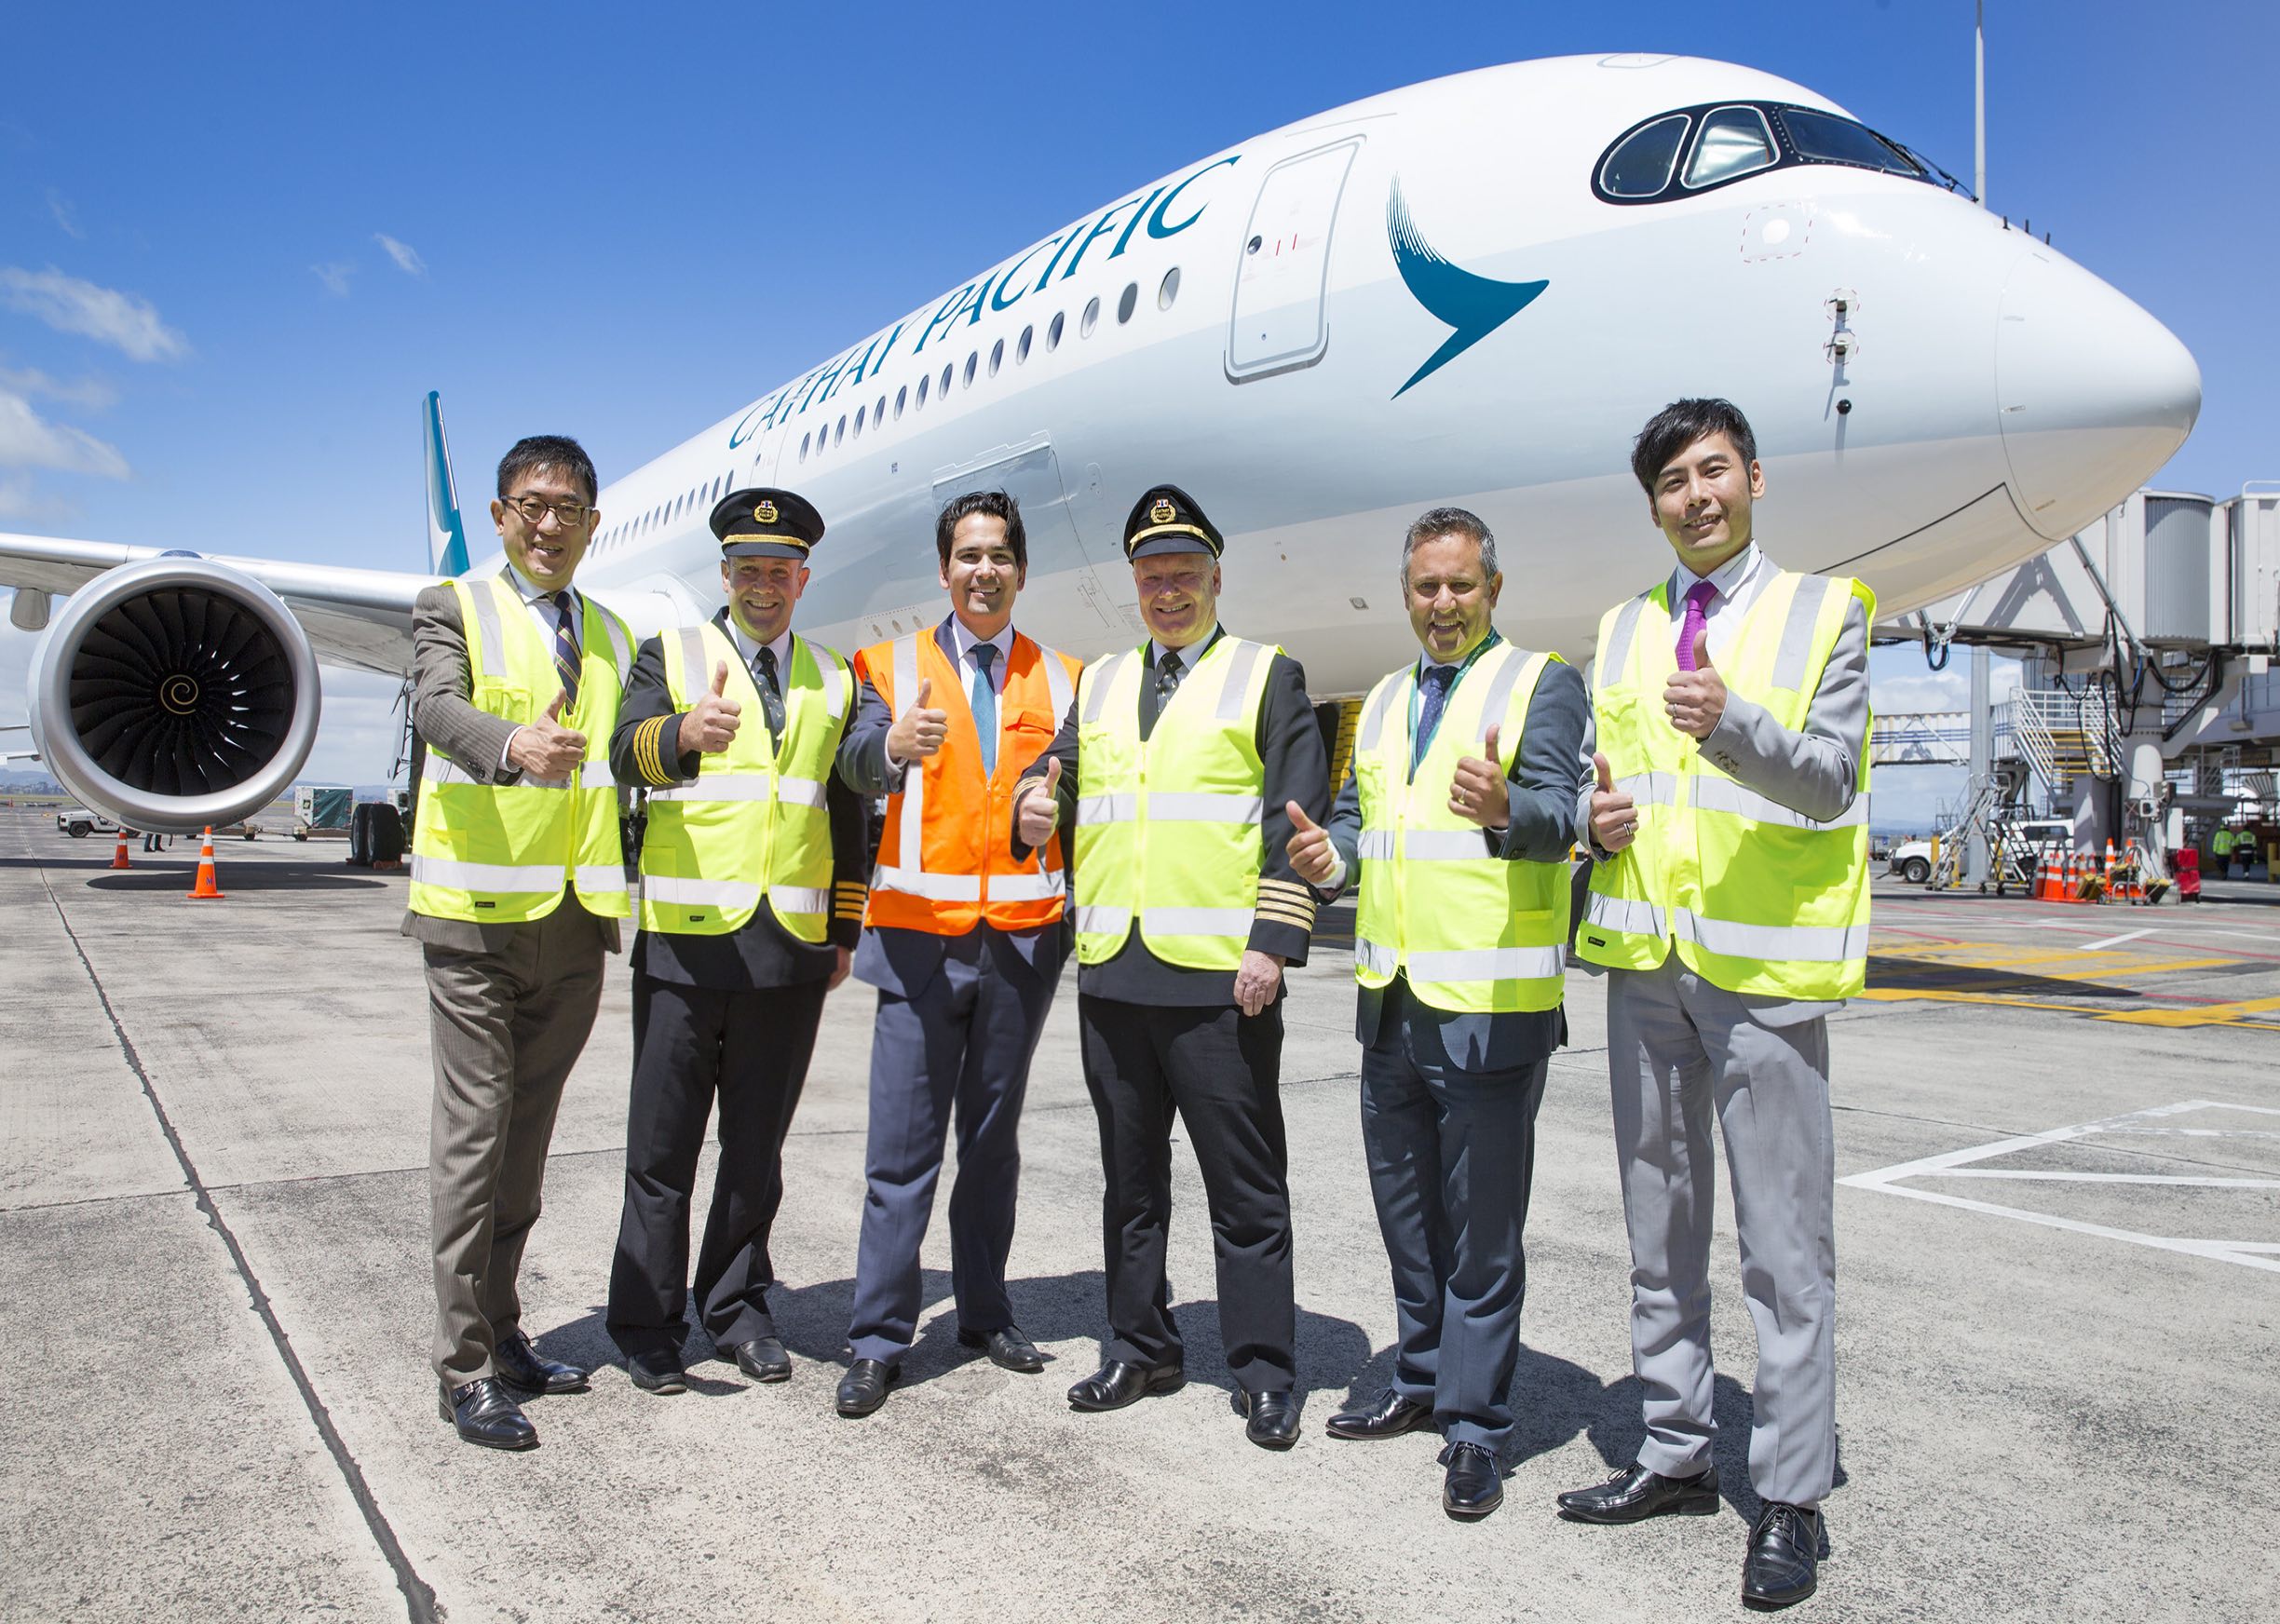 cap: New Zealand’s Minister of Transport, the Honourable Simon Bridges (third from left), welcomes the first A350 aircraft to Auckland with (from left) Cathay Pacific director sales & marketing Dane Cheng, chief pilot Airbus Gavin Haslemore, senior captain Colin Davis, country manager, New Zealand & Pacific Islands Mark Pirihi and general manager Southwest Pacific Nelson Chin.